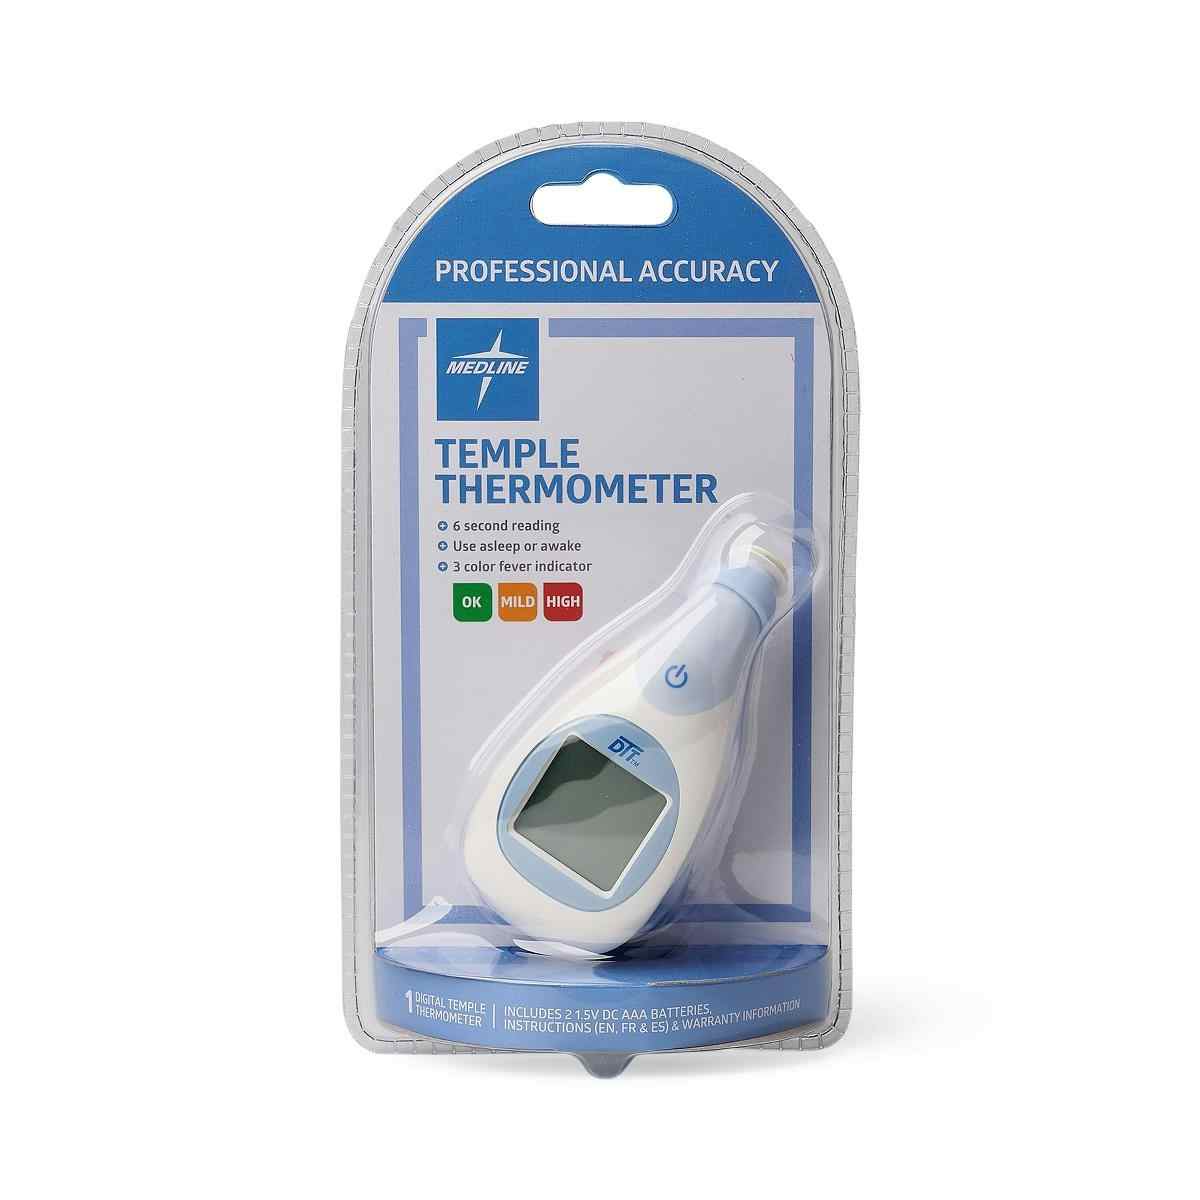 Medline Instant Read Digital Temple Thermometer, MDS9698L, 1 Each